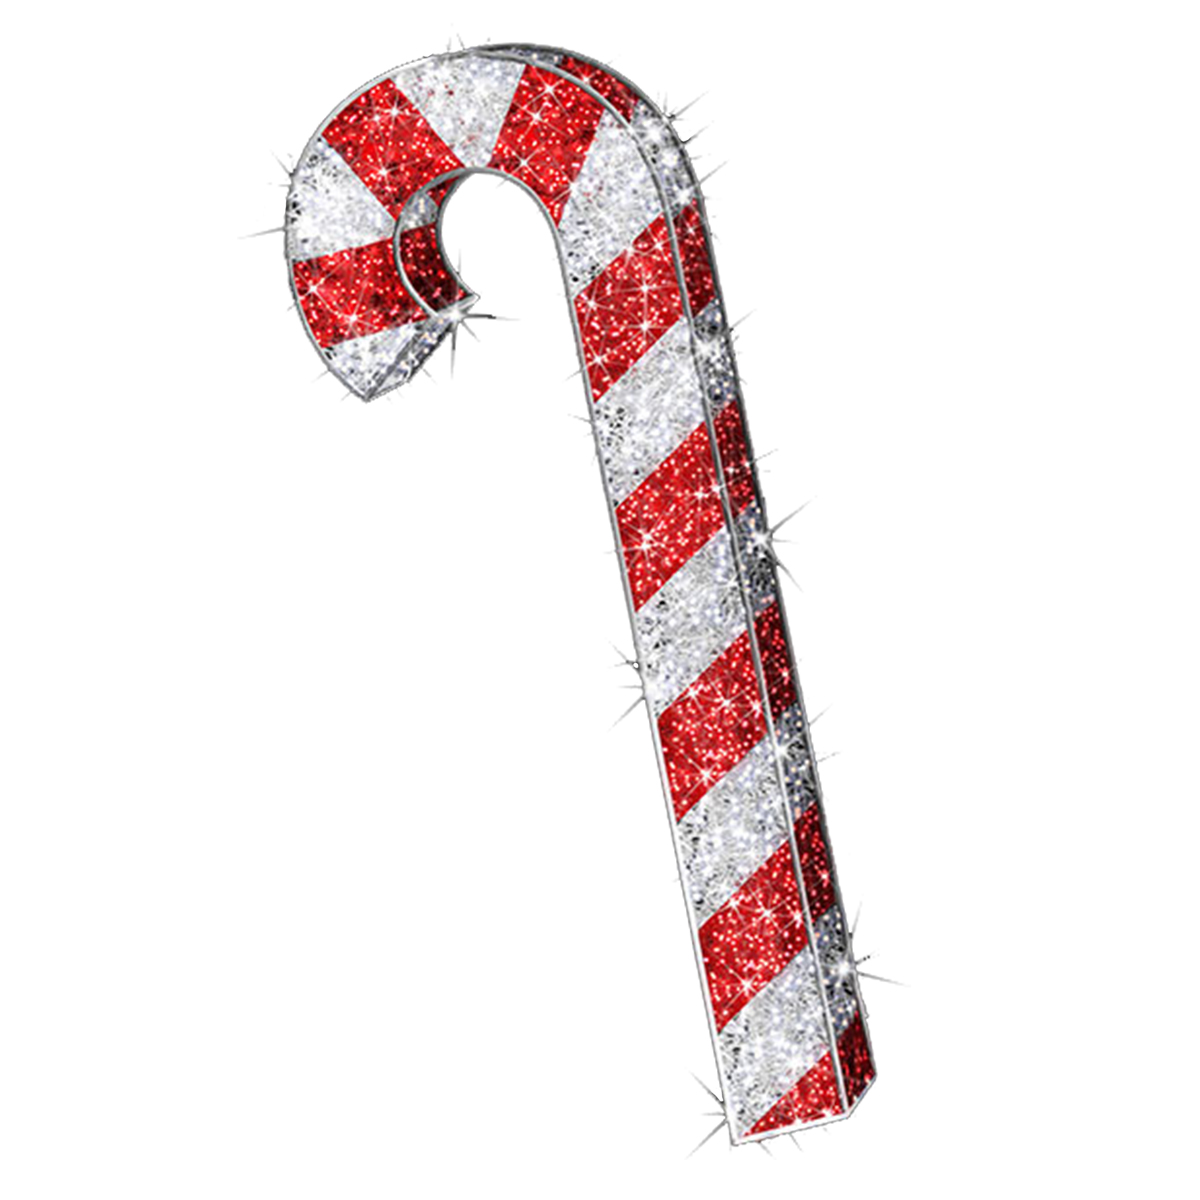 3D Candy Cane - Christmas Display - Life-Size - 7.2ft tall